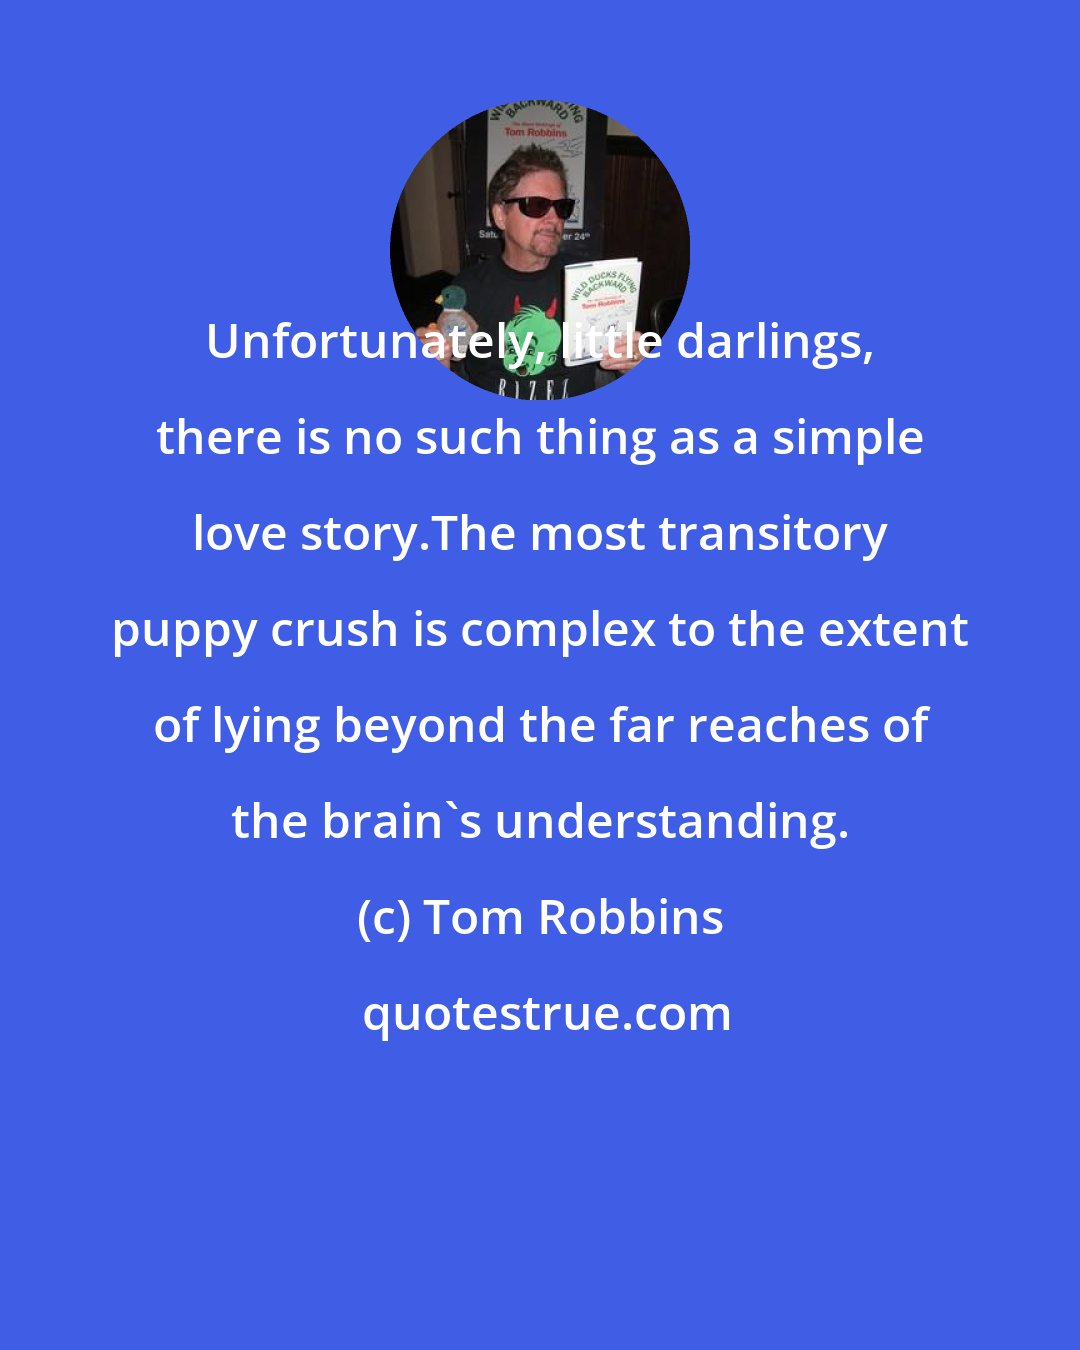 Tom Robbins: Unfortunately, little darlings, there is no such thing as a simple love story.The most transitory puppy crush is complex to the extent of lying beyond the far reaches of the brain's understanding.